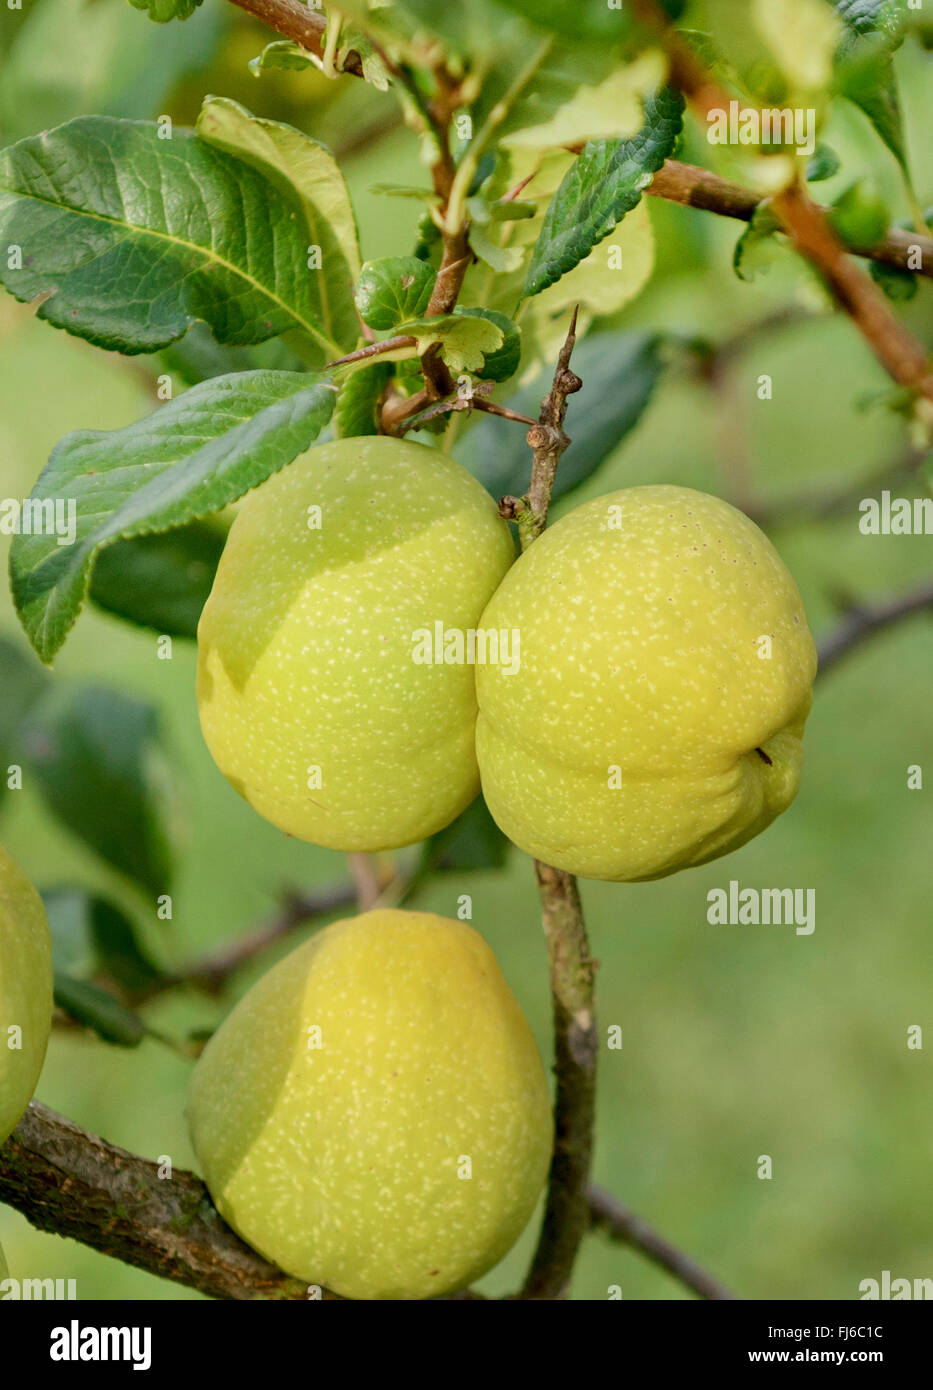 Ornamental quince (Chaenomeles speciosa), fruits on a branch, Germany Stock Photo